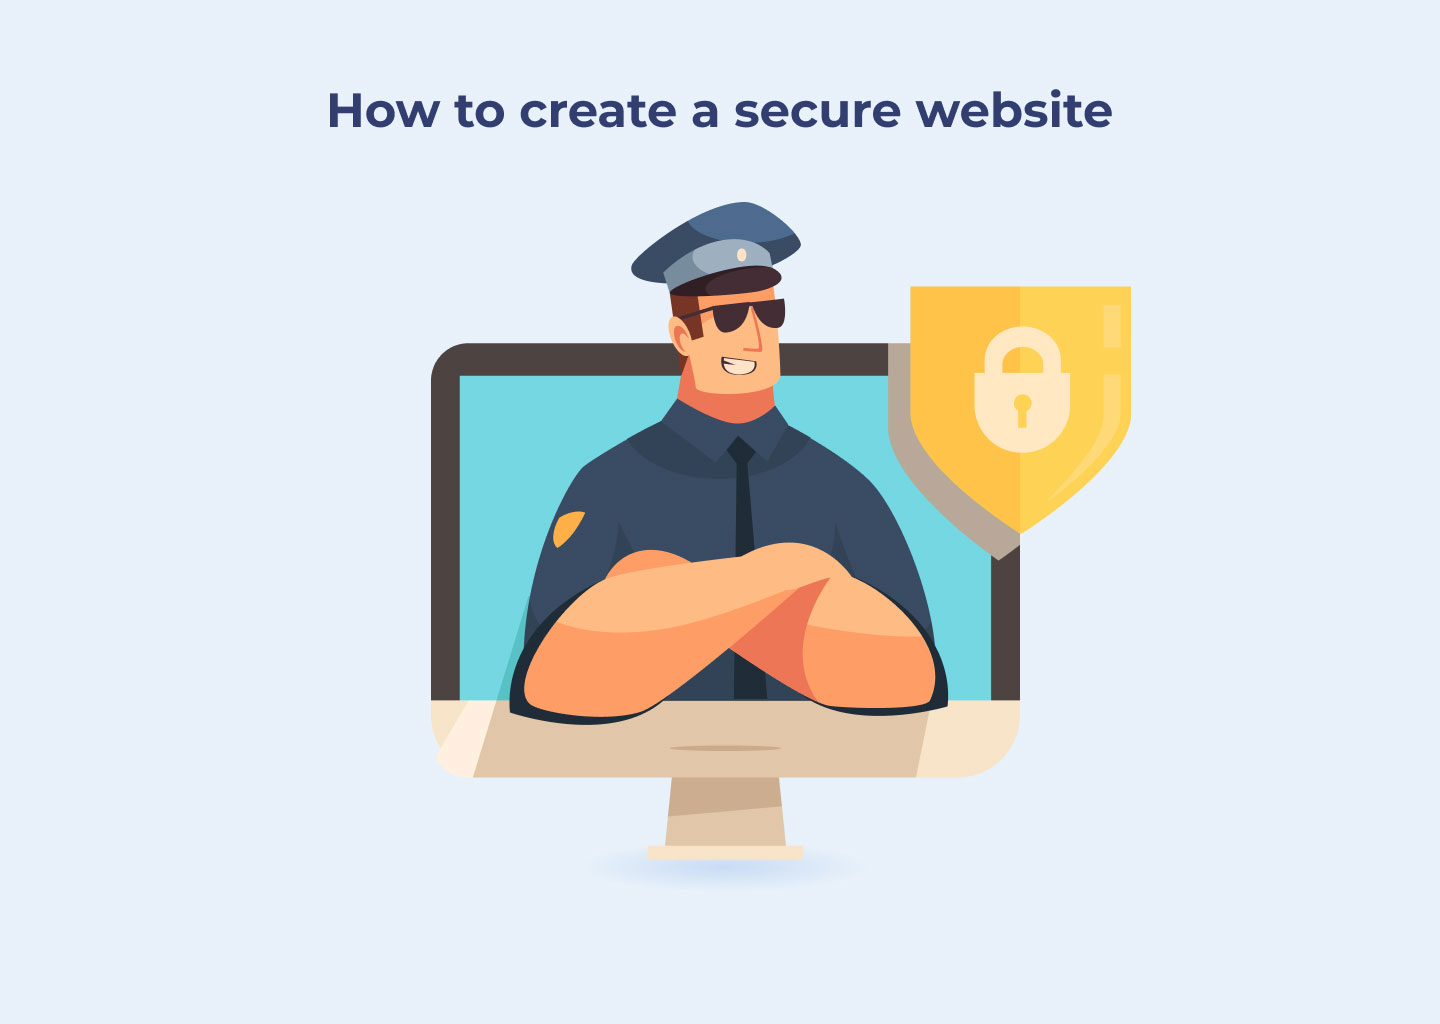 How to create a secure website